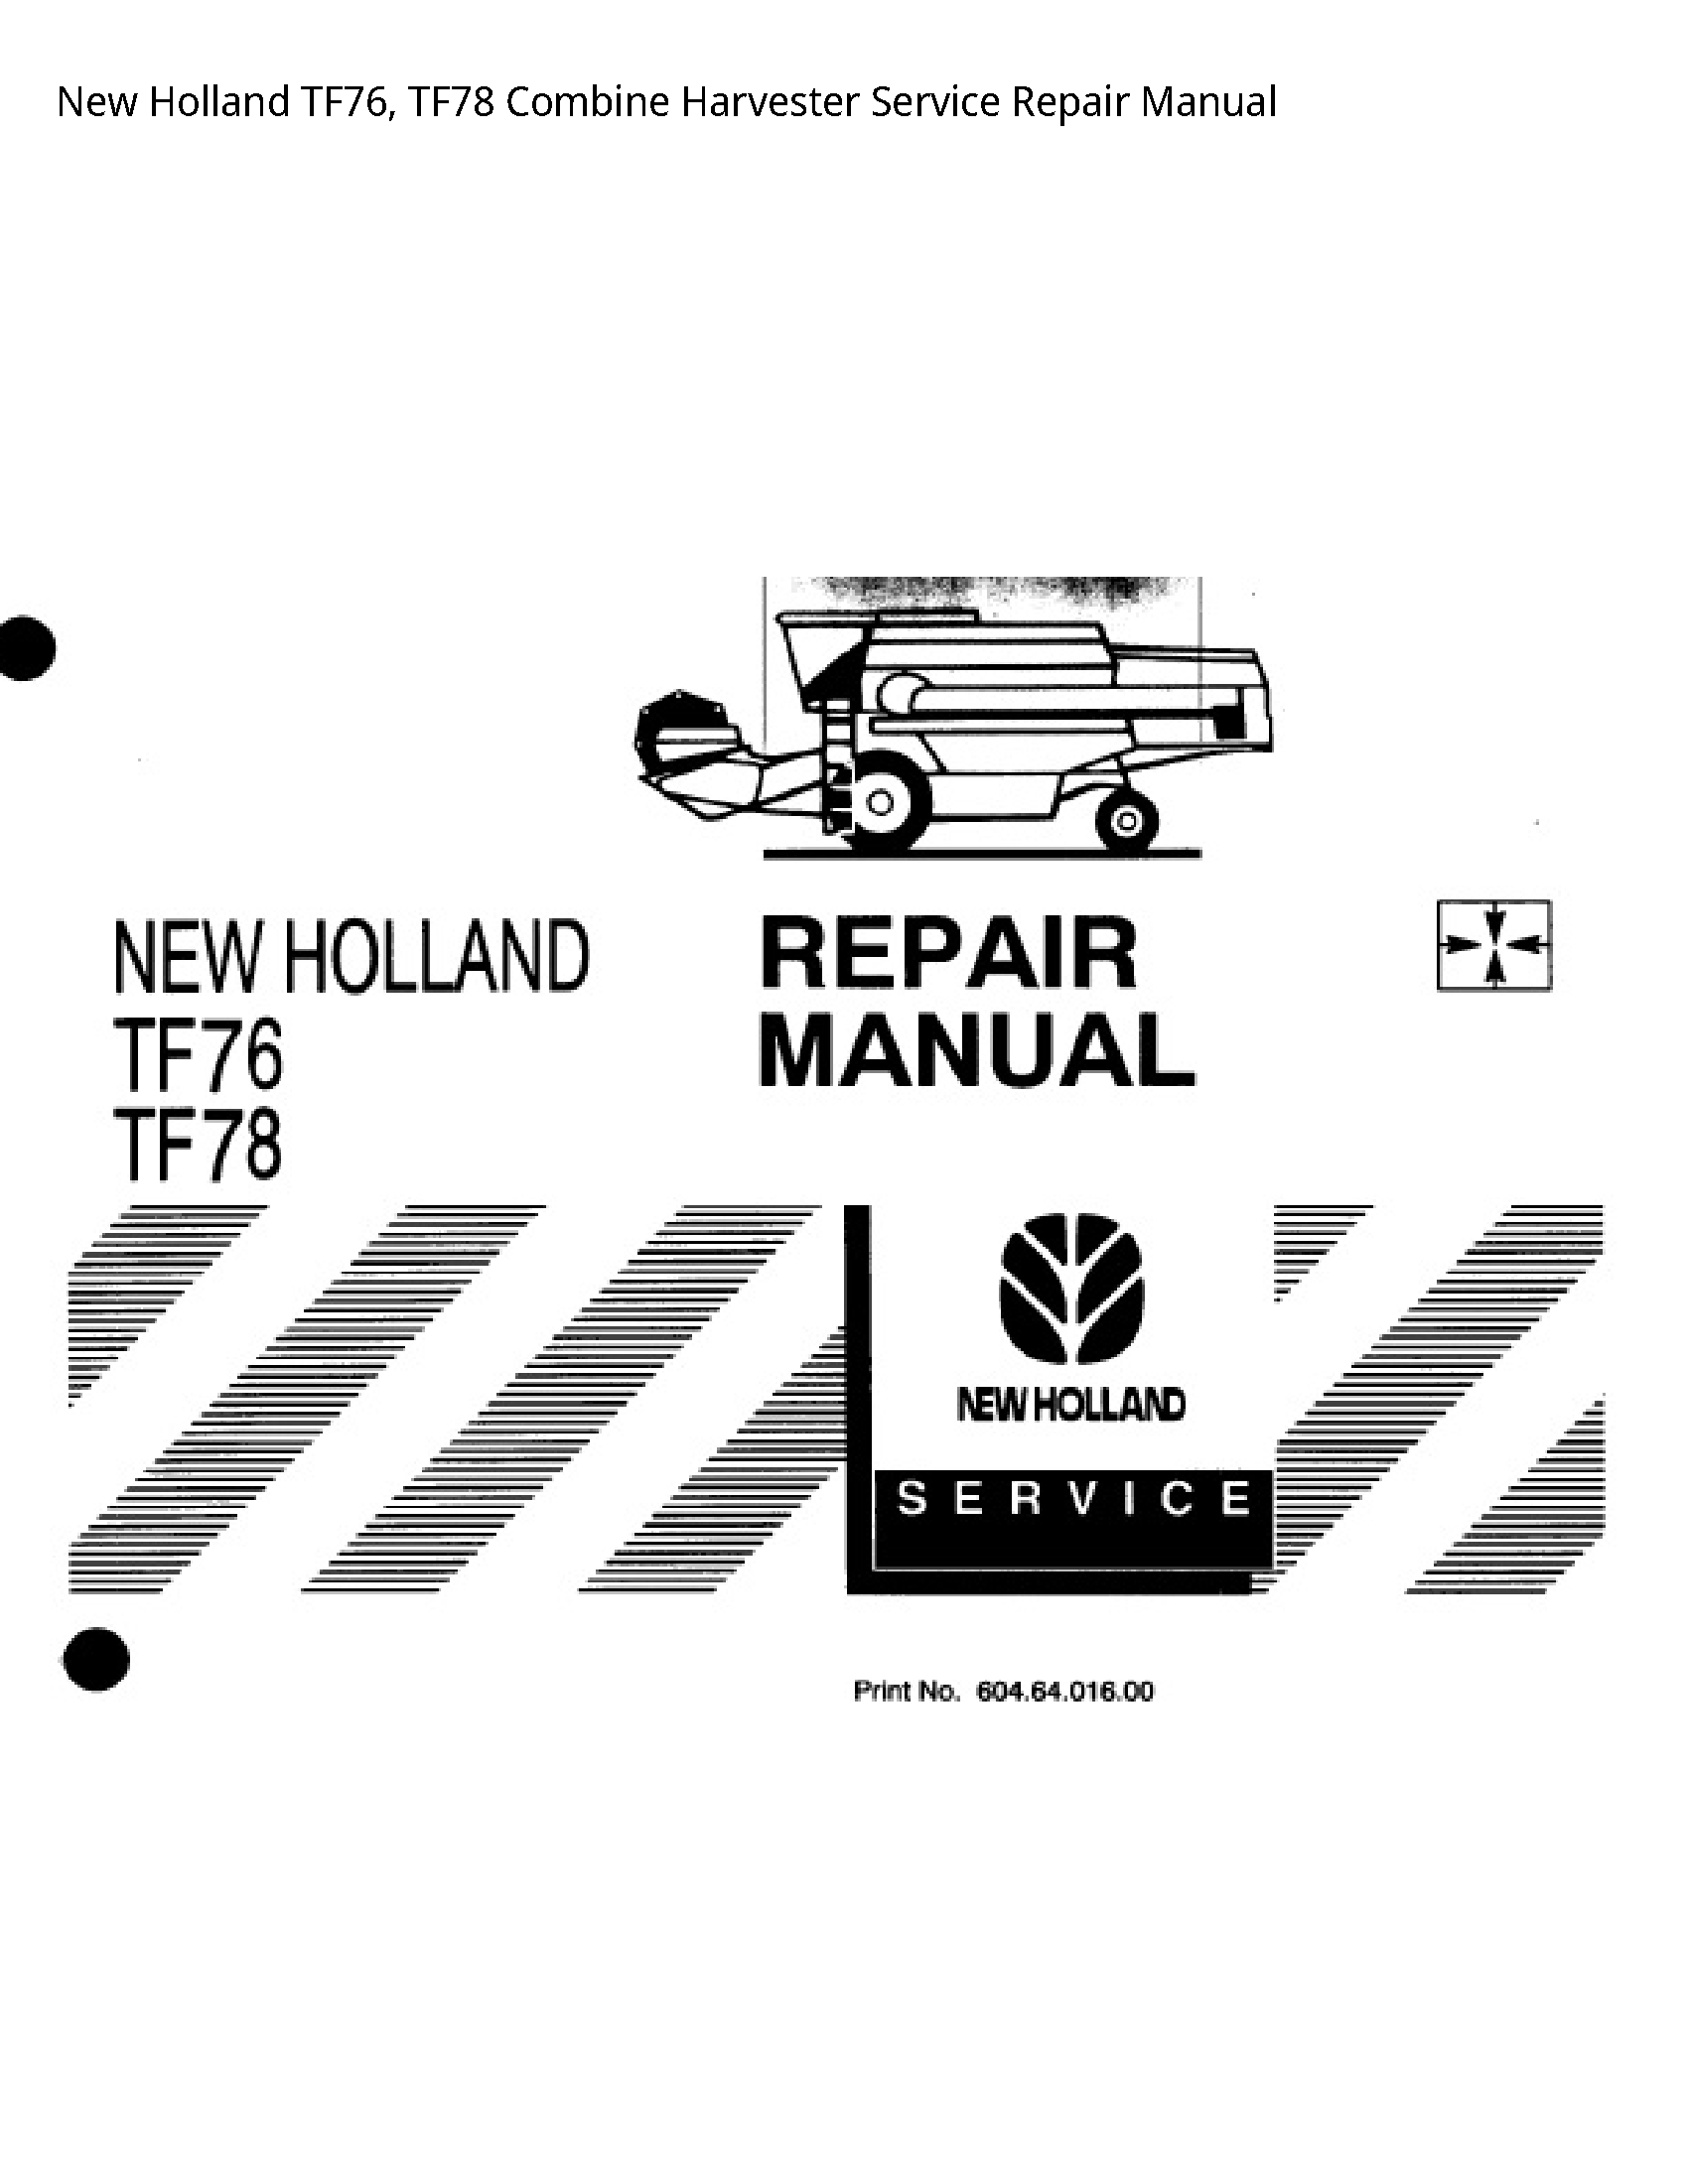 New Holland TF76 Combine Harvester manual